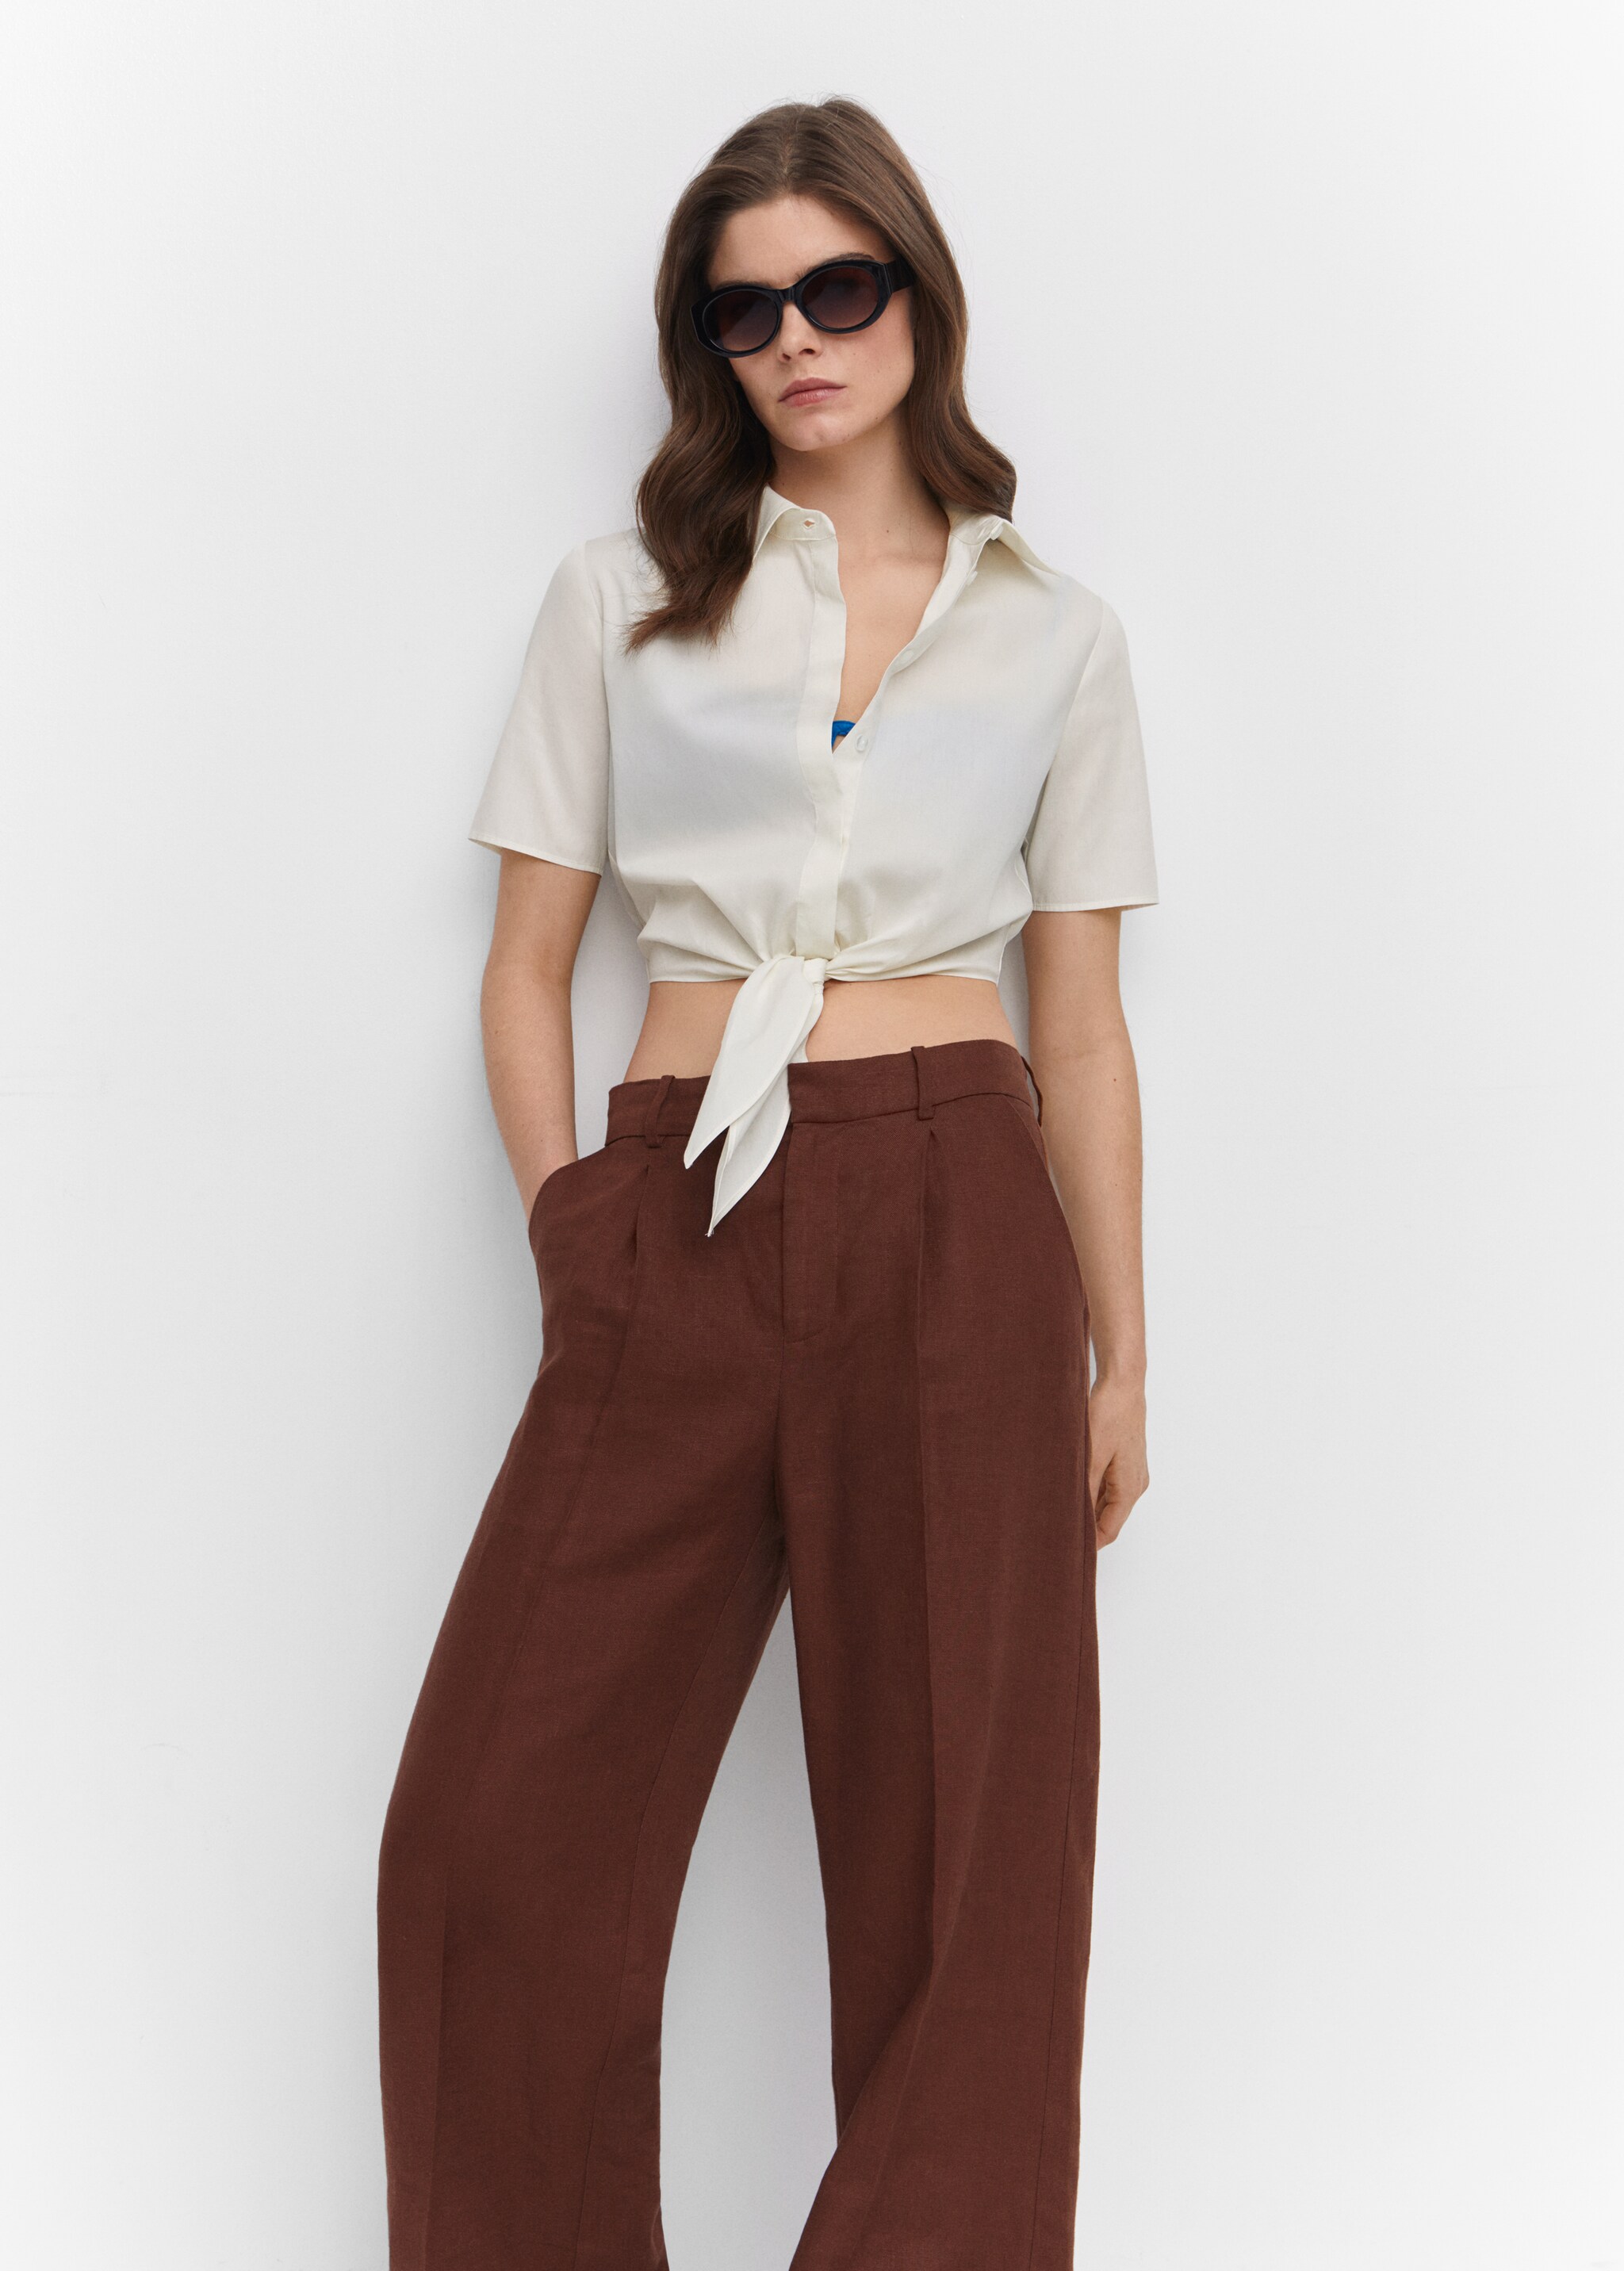 Cropped shirt with knot  - Medium plane